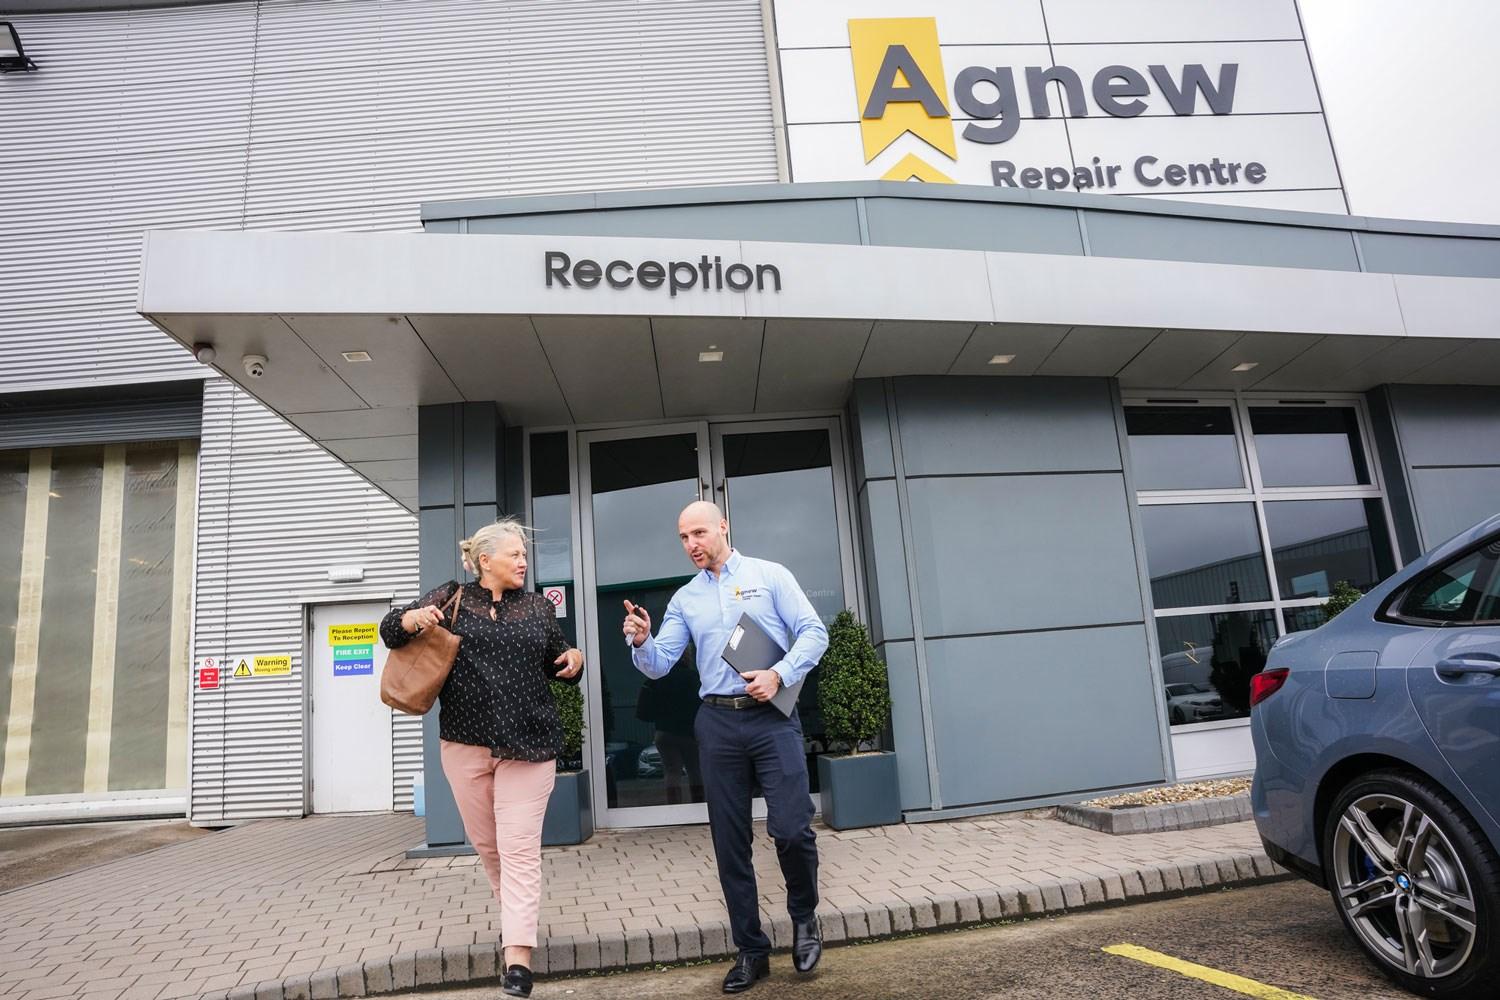 Senior Vehicle Damage Assessor walks with customer to their car outside the reception of Agnew Repair Centre